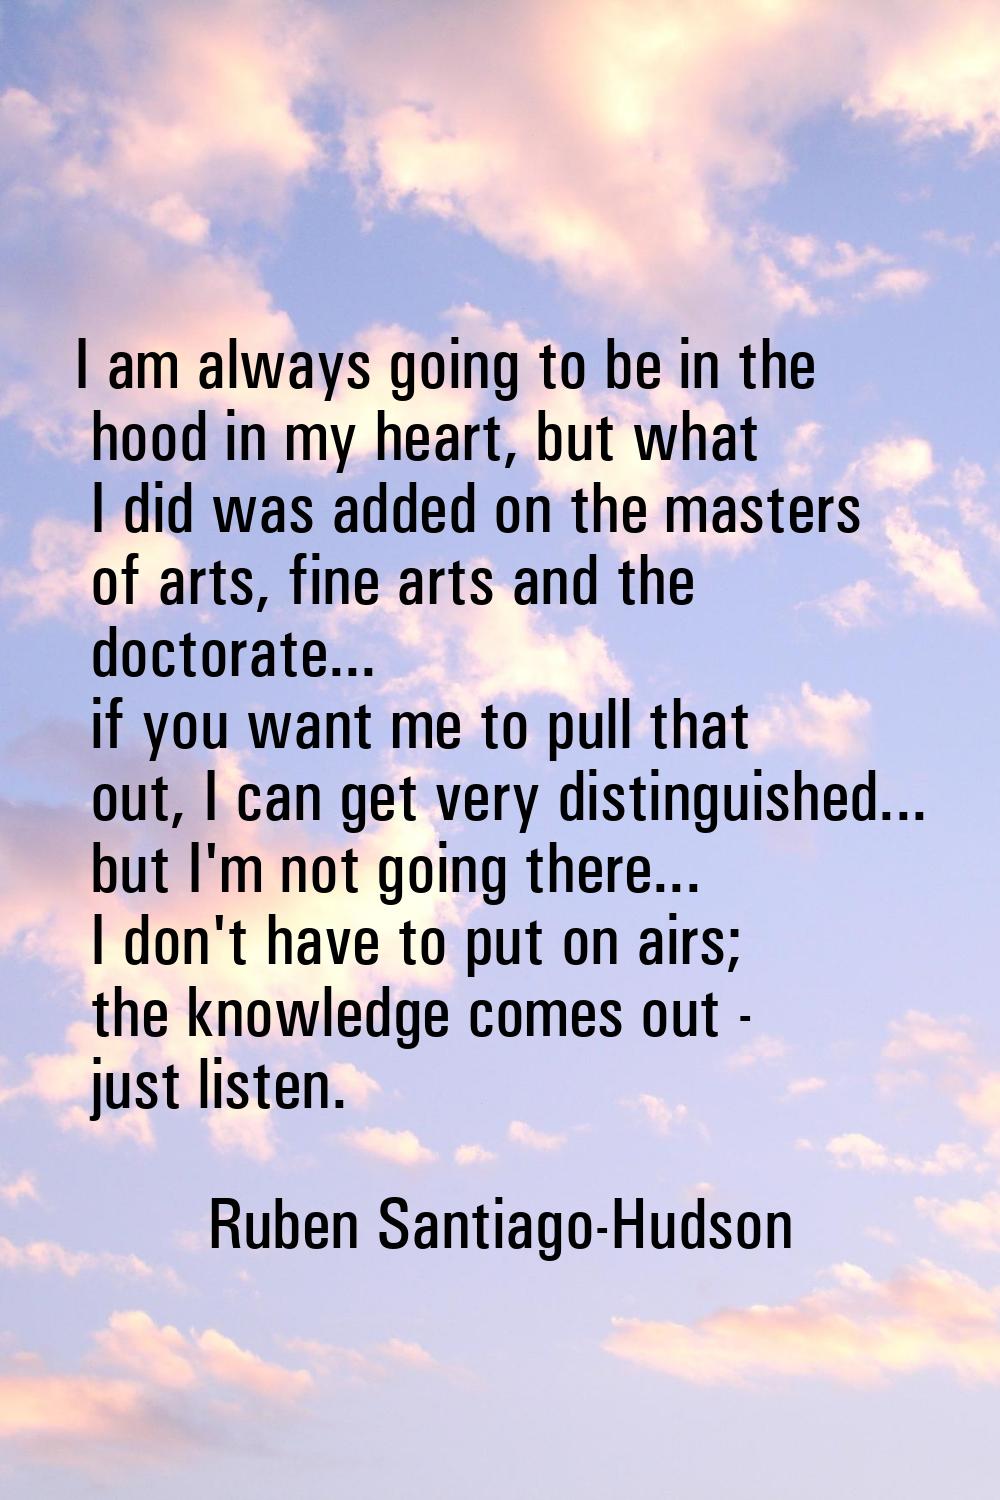 I am always going to be in the hood in my heart, but what I did was added on the masters of arts, f